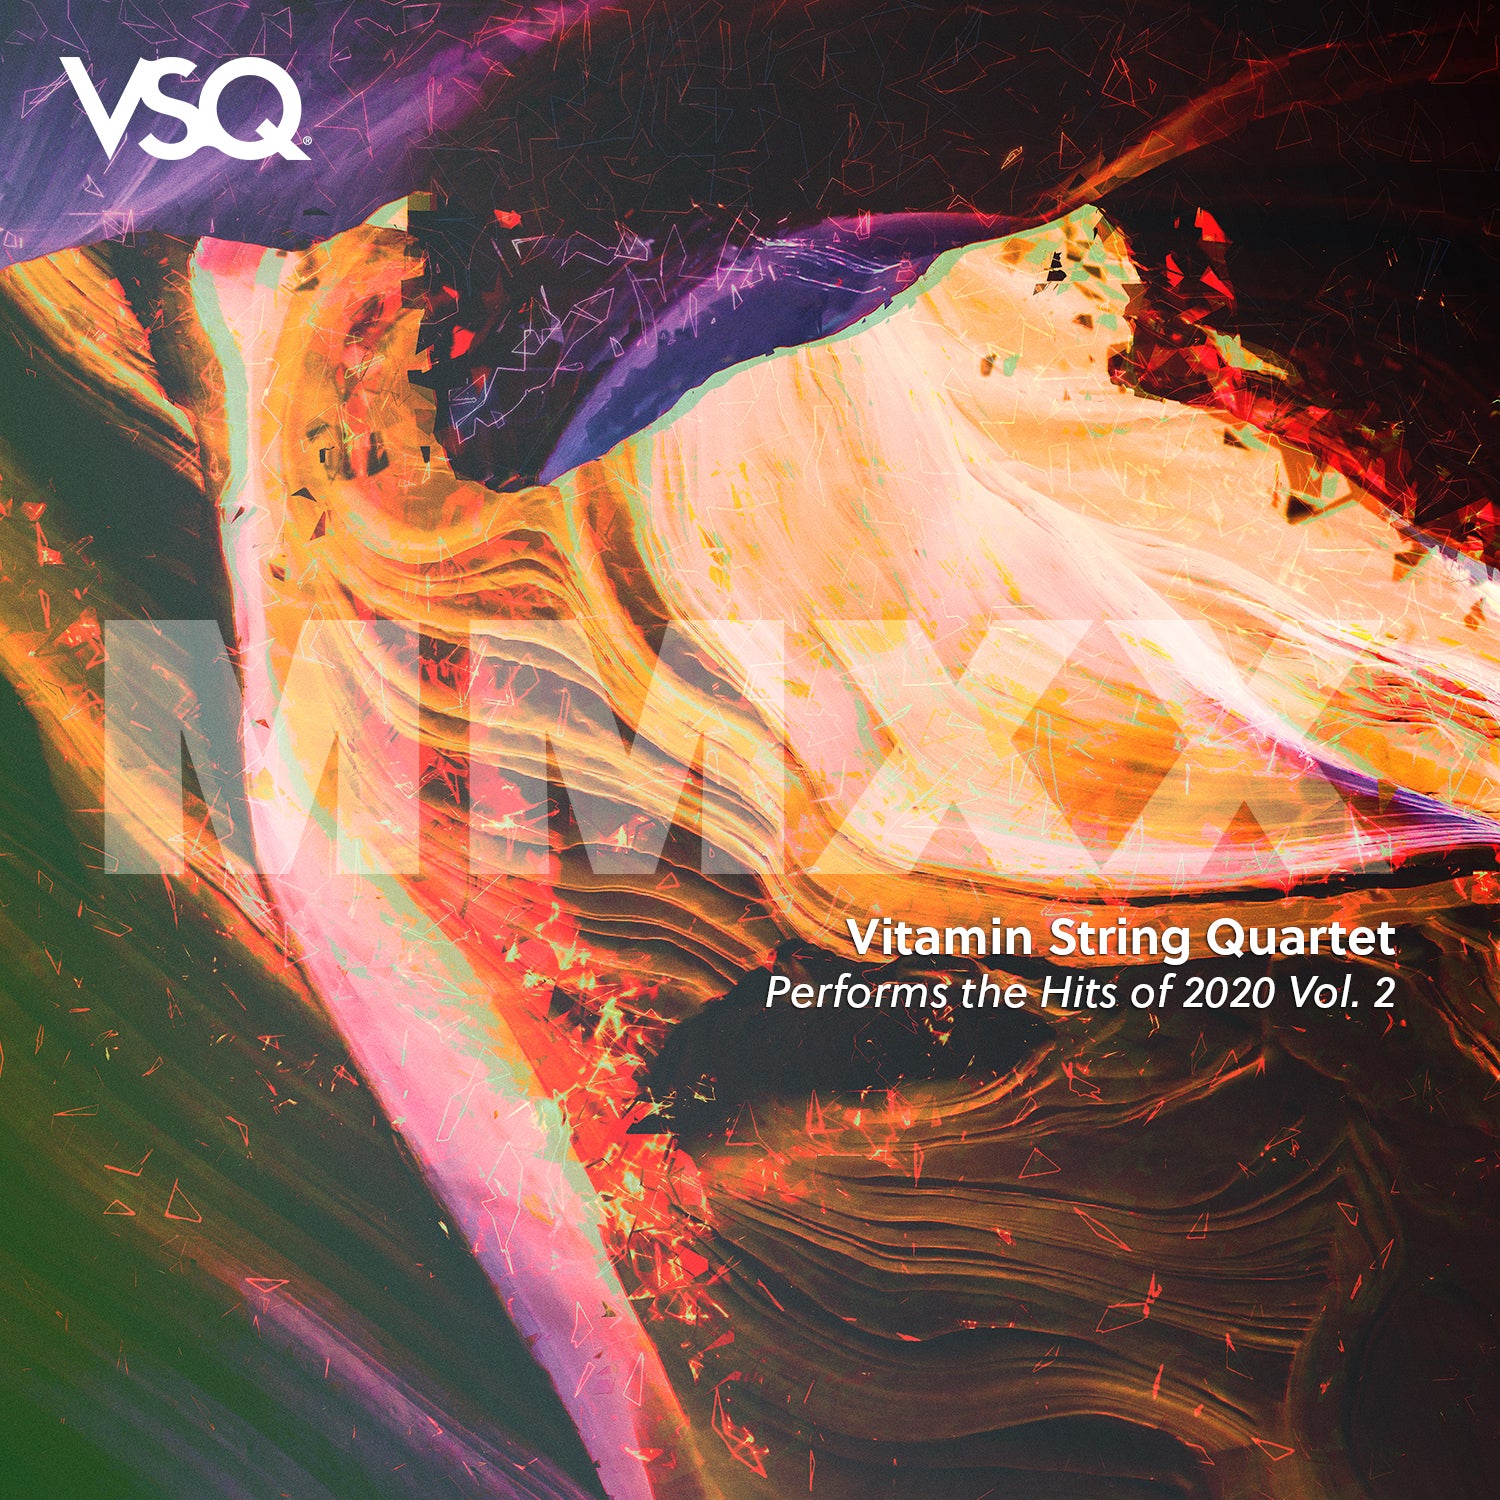 VSQ Performs the Hits of 2020 Vol. 2 Deluxe Version